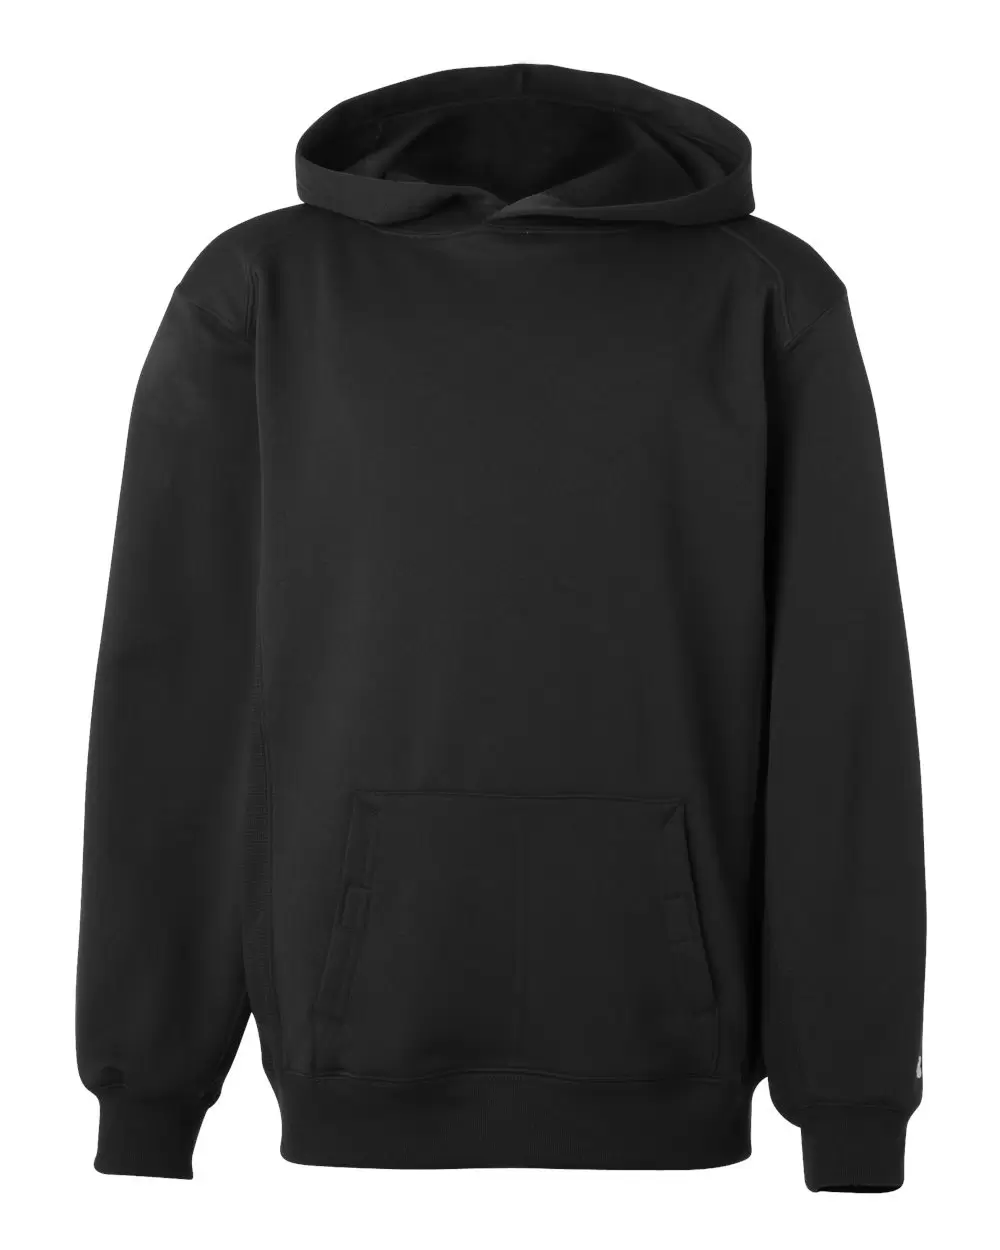 2454 Badger BT5 Youth Performance Hoodie - From $26.74